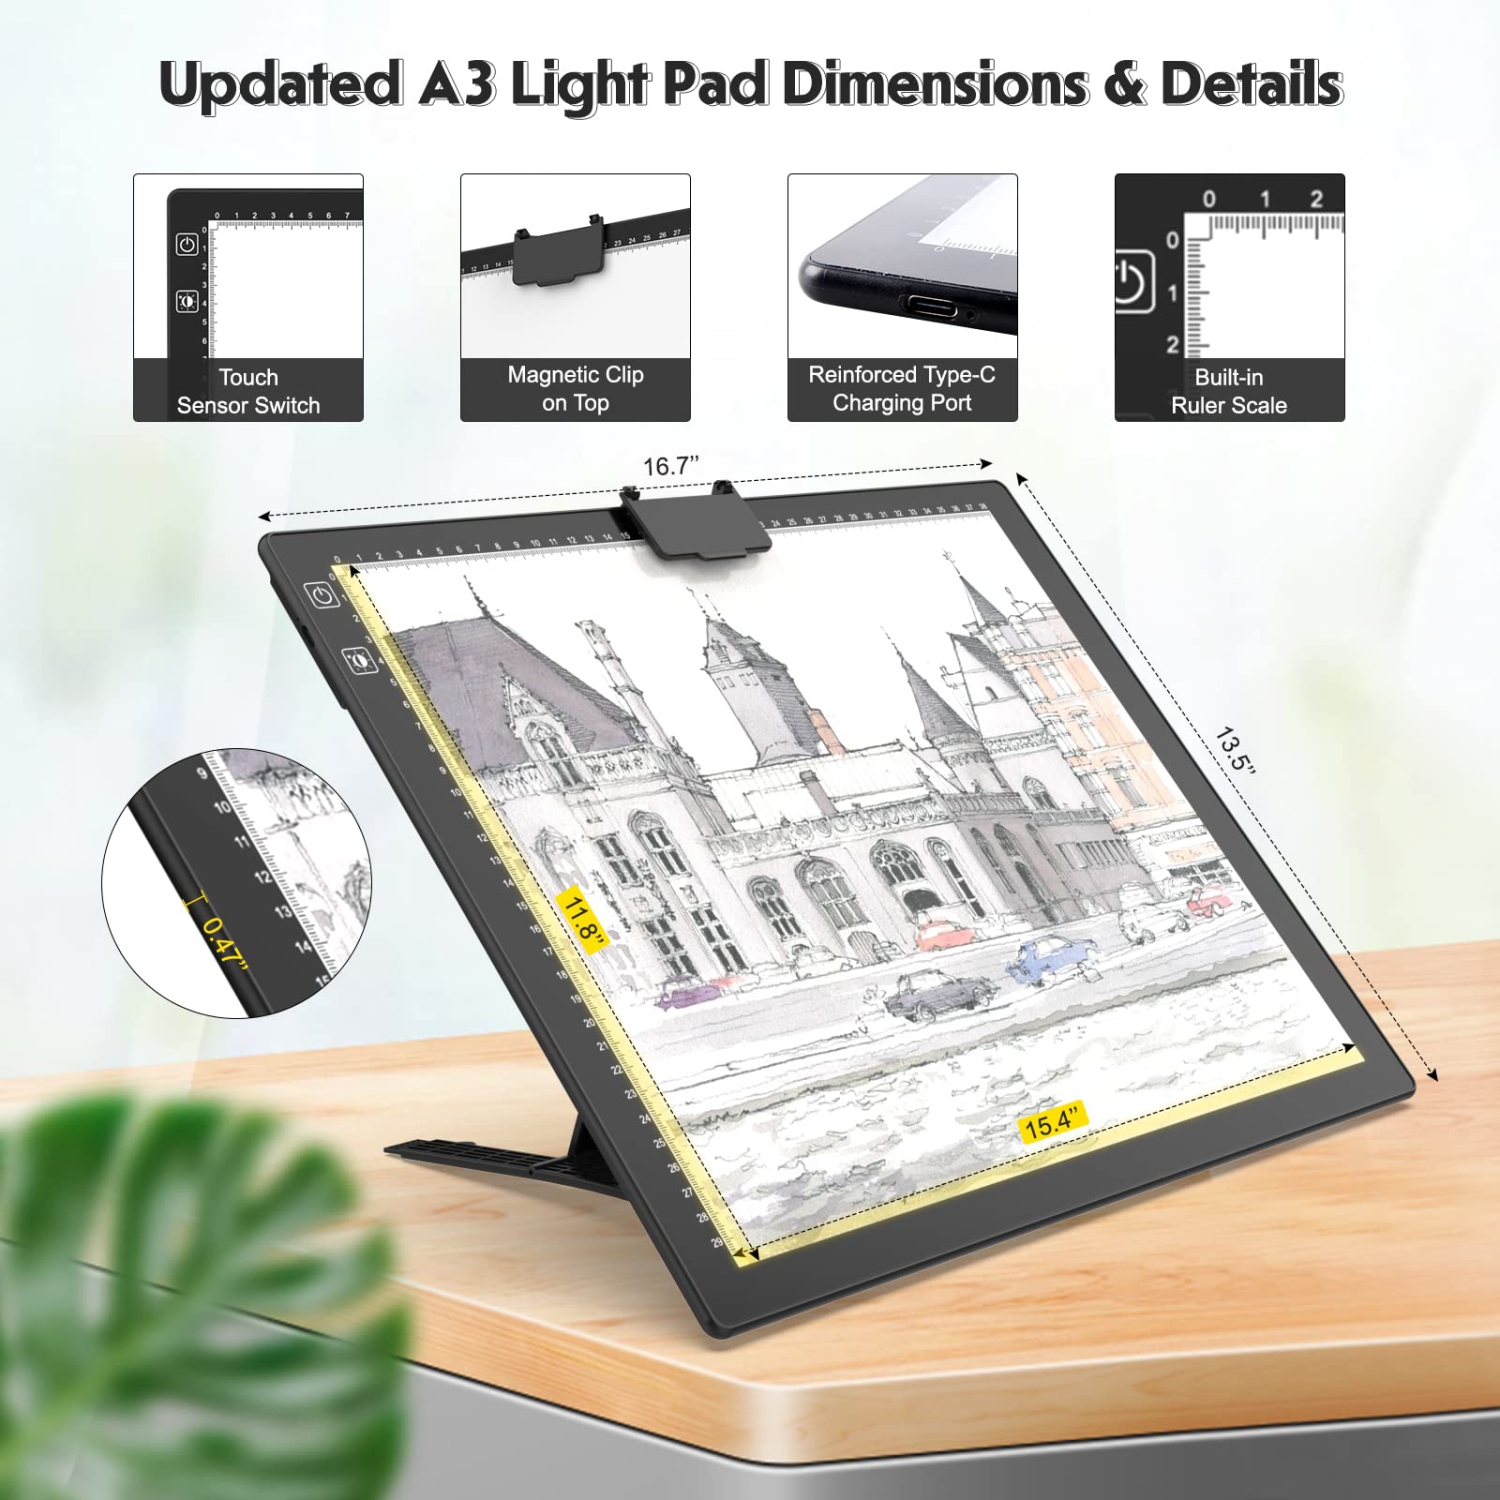 DiamondShine A3 Wireless Light Pad - Rechargeable LED Tracing